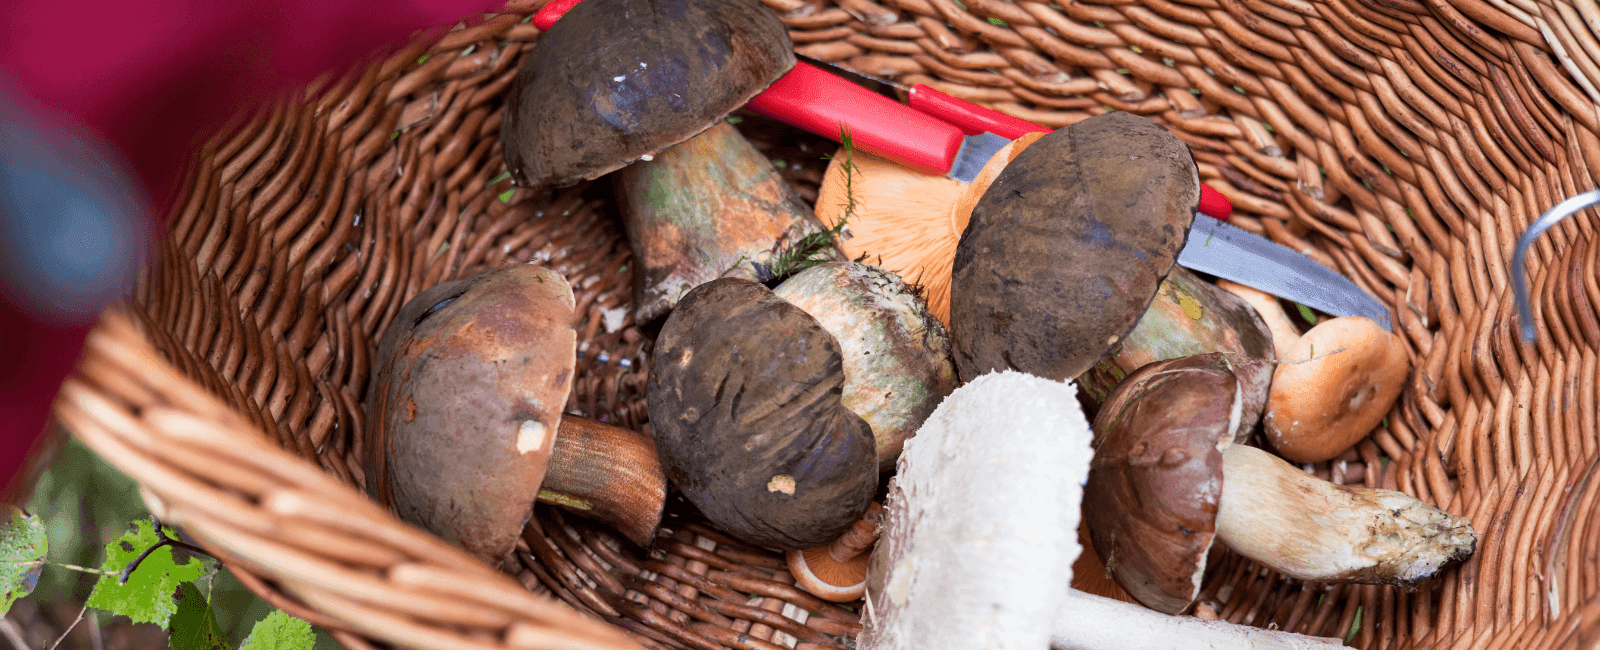 12 Helpful Gifts for Mushroom Hunters and Fungi Wildcrafters